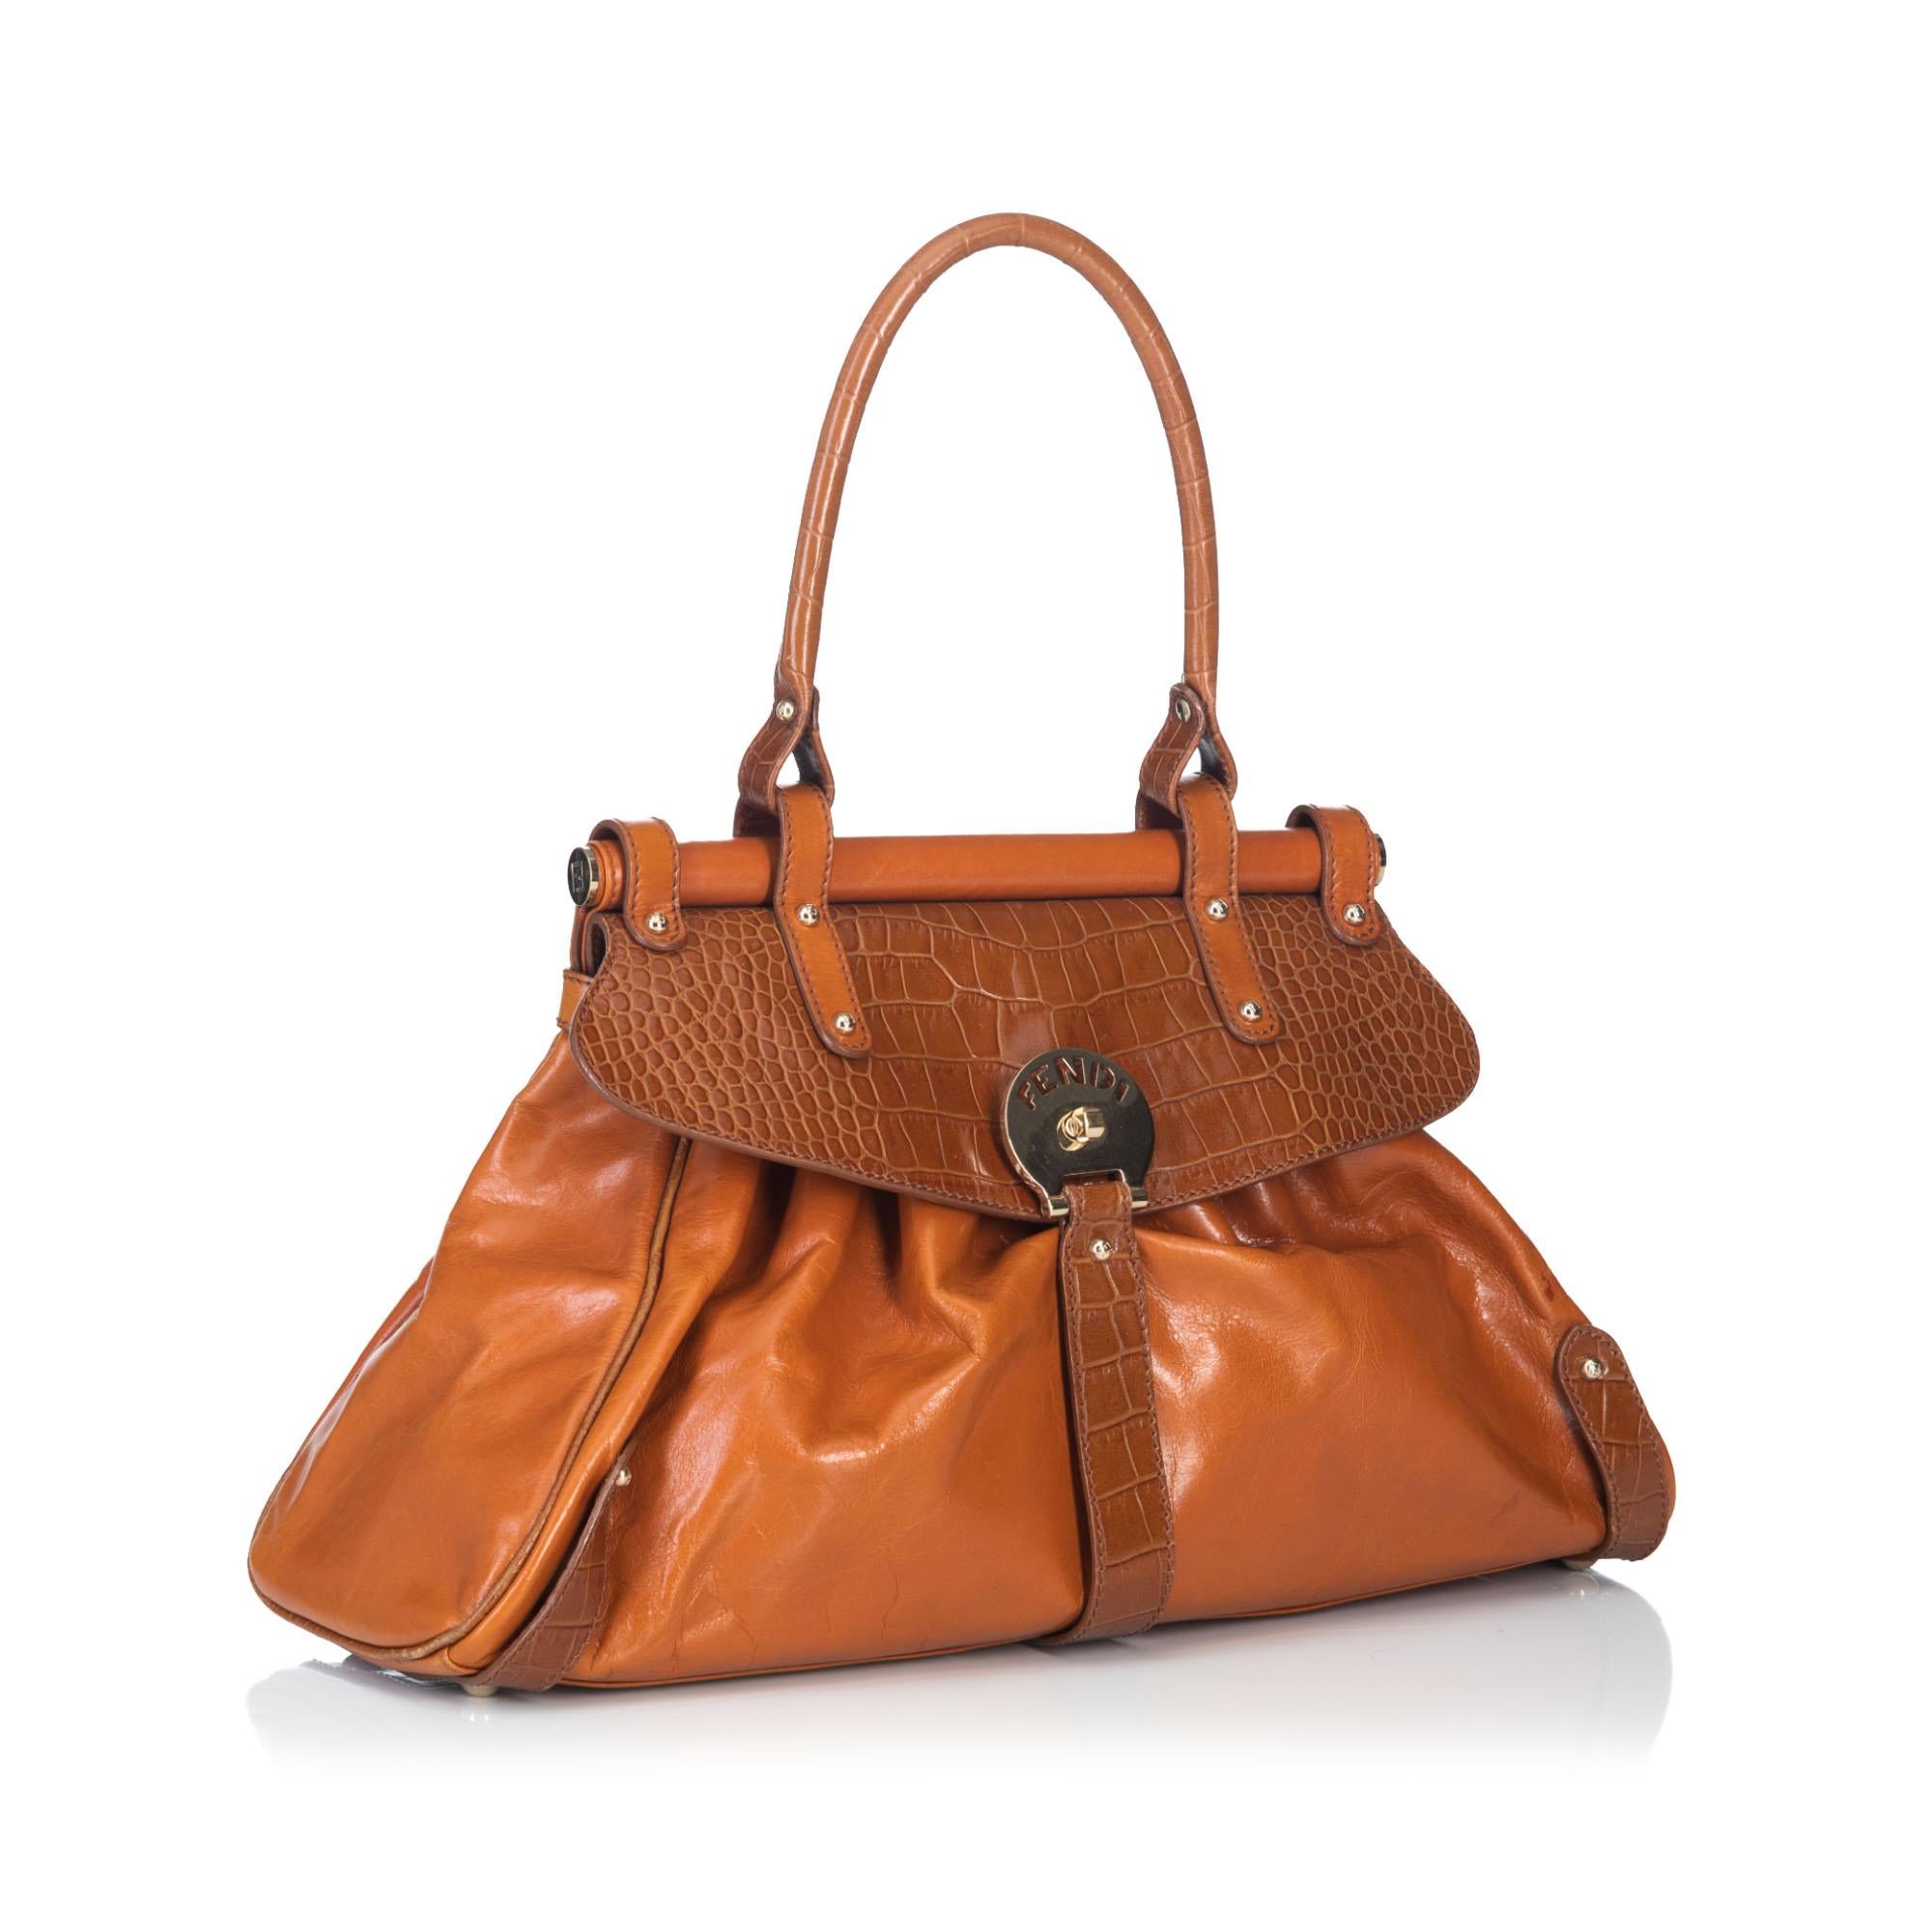 The Magic Bag features a leather body with embossed crocodile trim, single rolled leather handle, front flap with twist-lock closure, and an interior zip pocket. It carries as AB condition rating.

Inclusions: 
This item does not come with